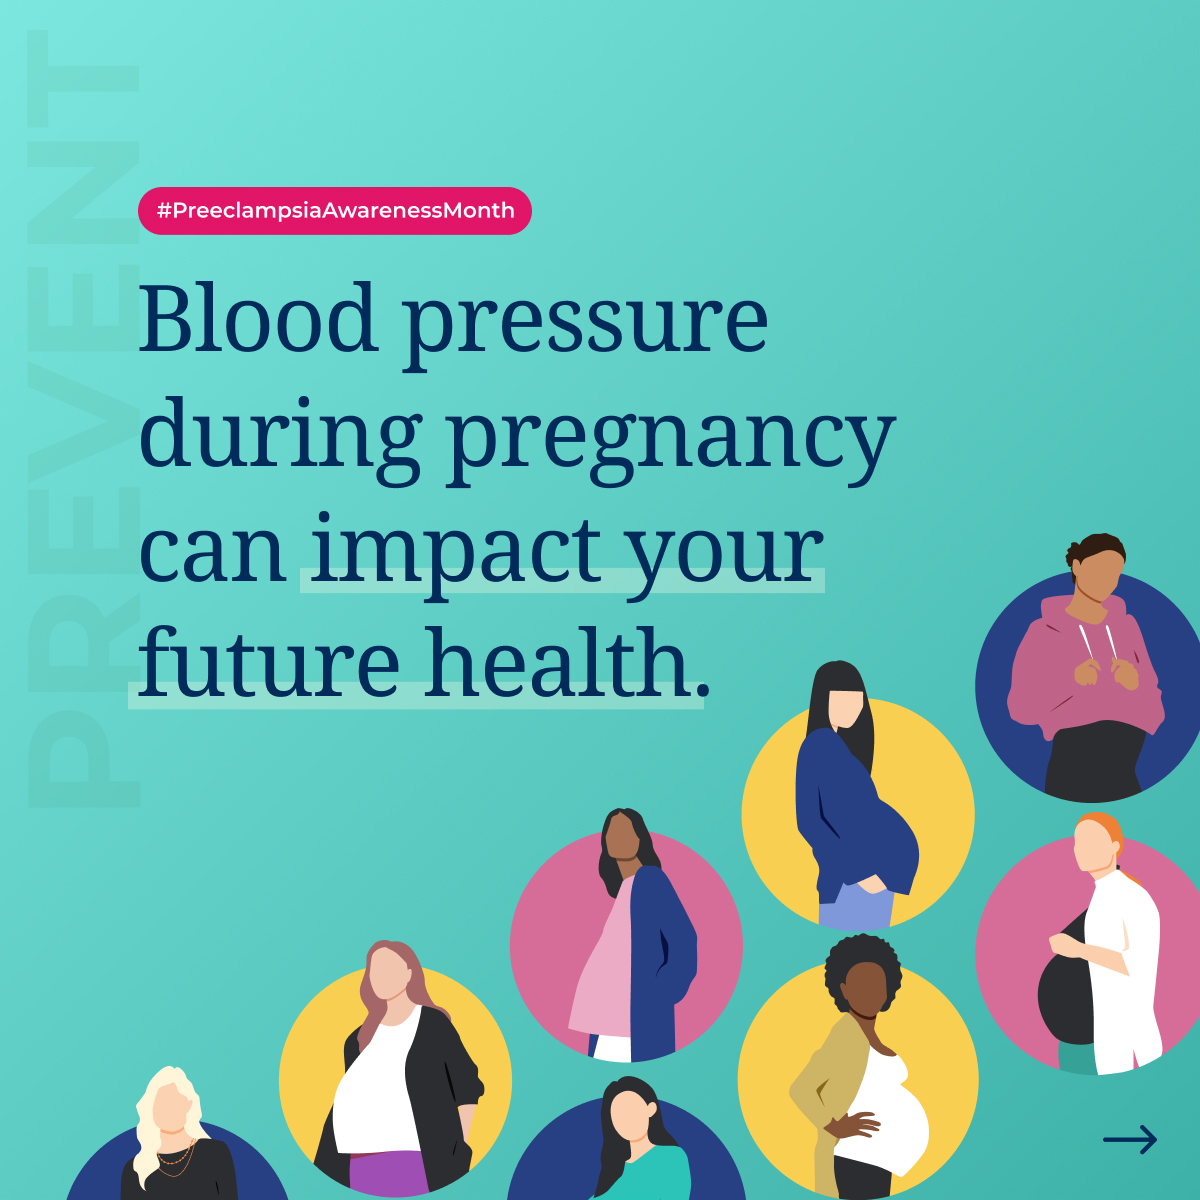 Seven ways to support healthy blood pressure during pregnancy